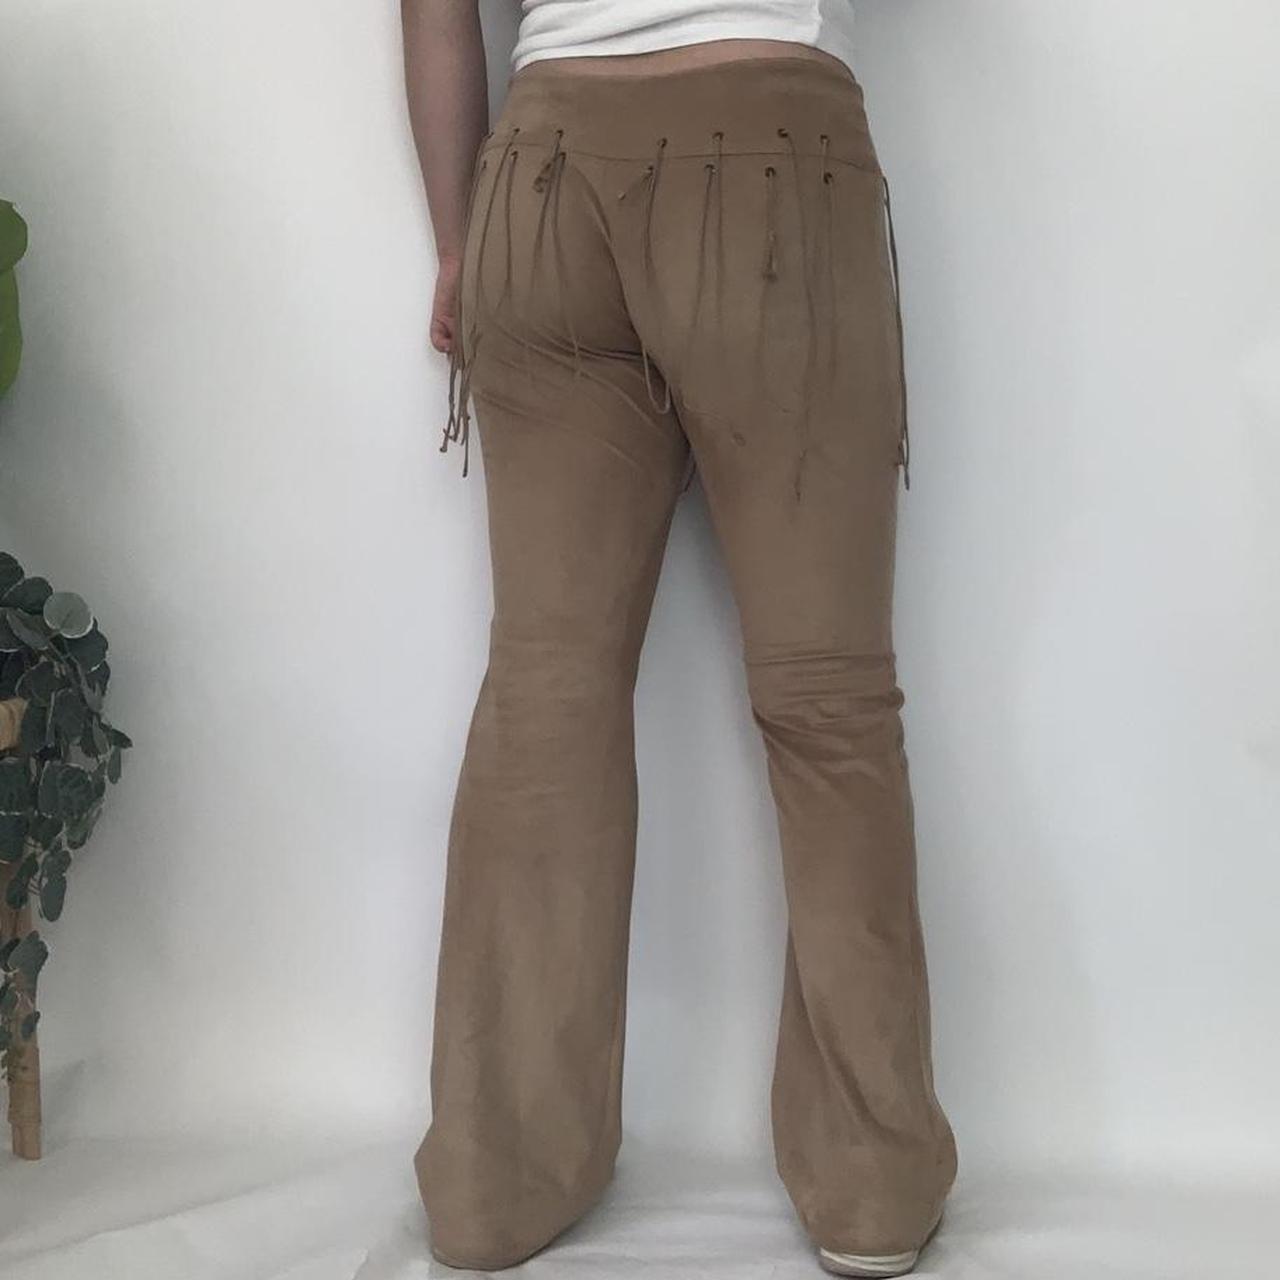 Y2K COOL GIRL 🧞‍♀️ vintage y2k tan suede flared trousers with fringe